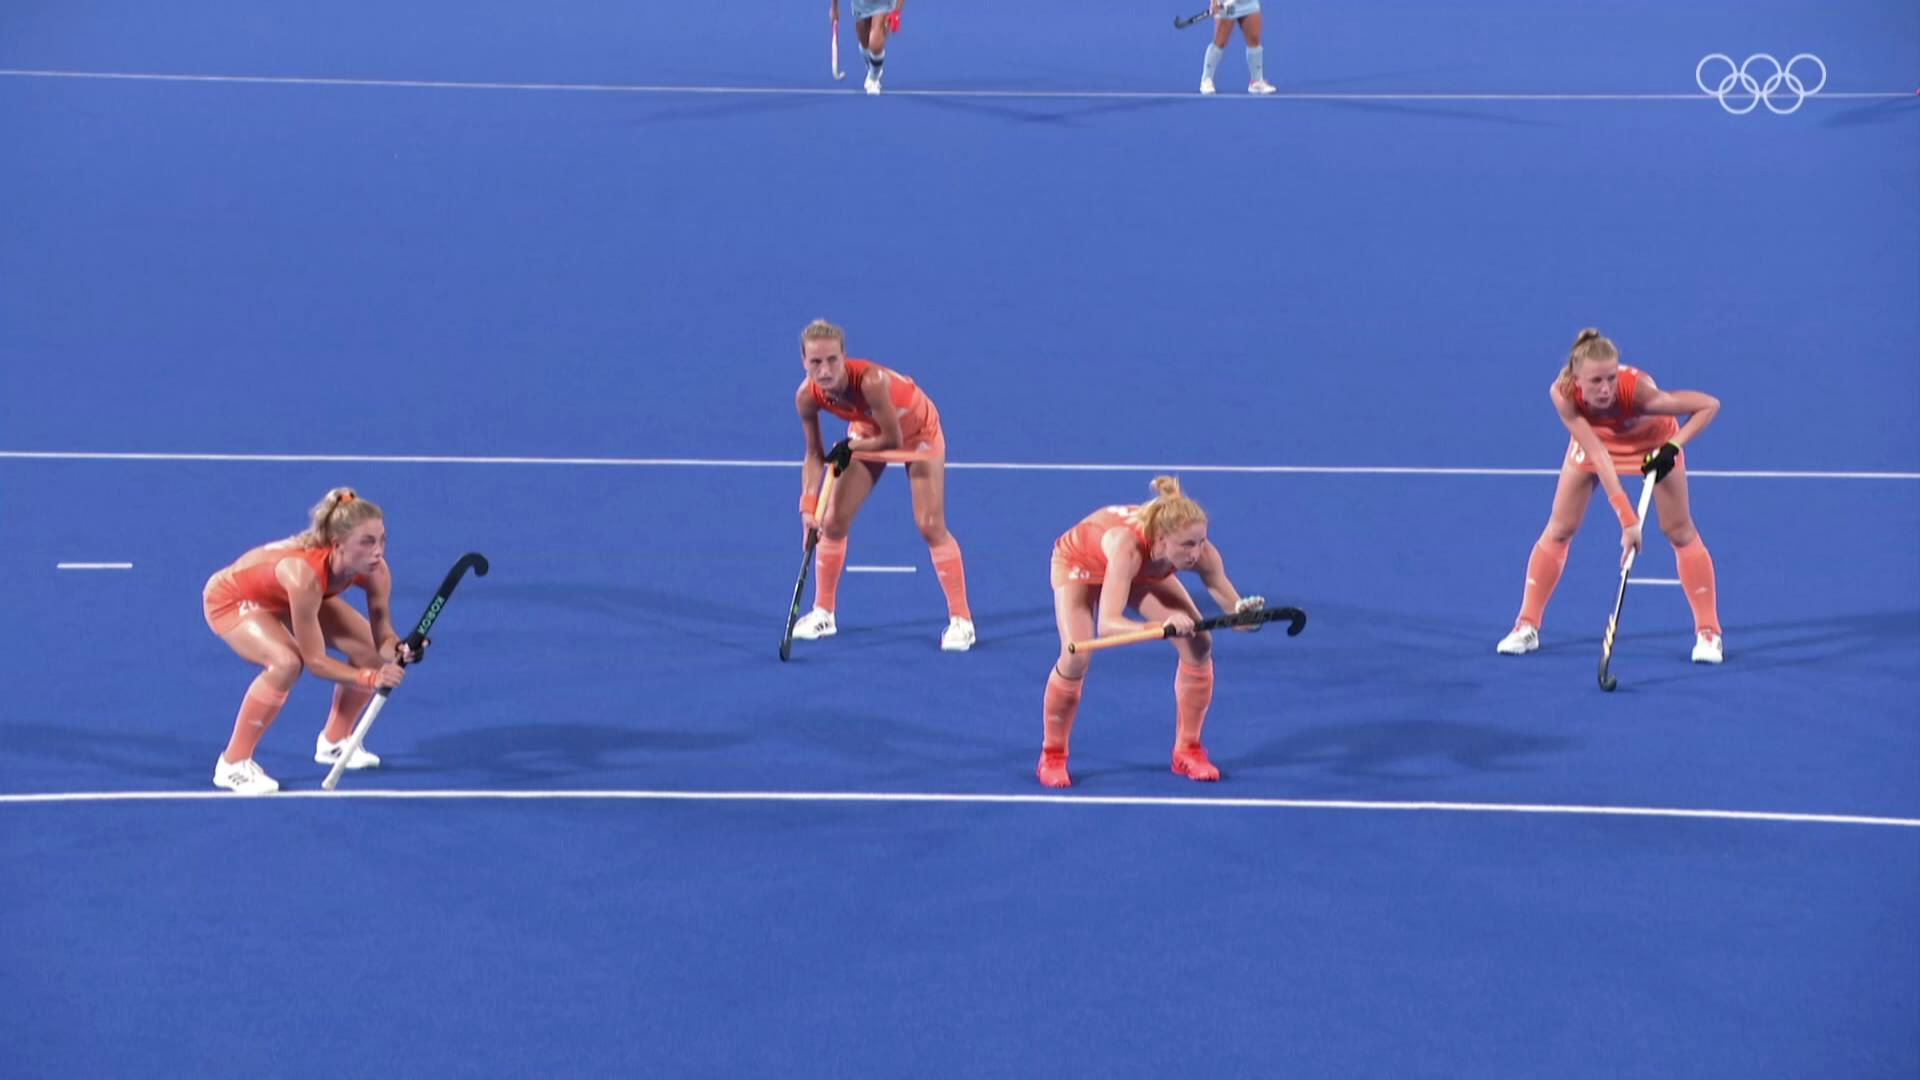 How to qualify for hockey at Paris 2024. The Olympics qualification